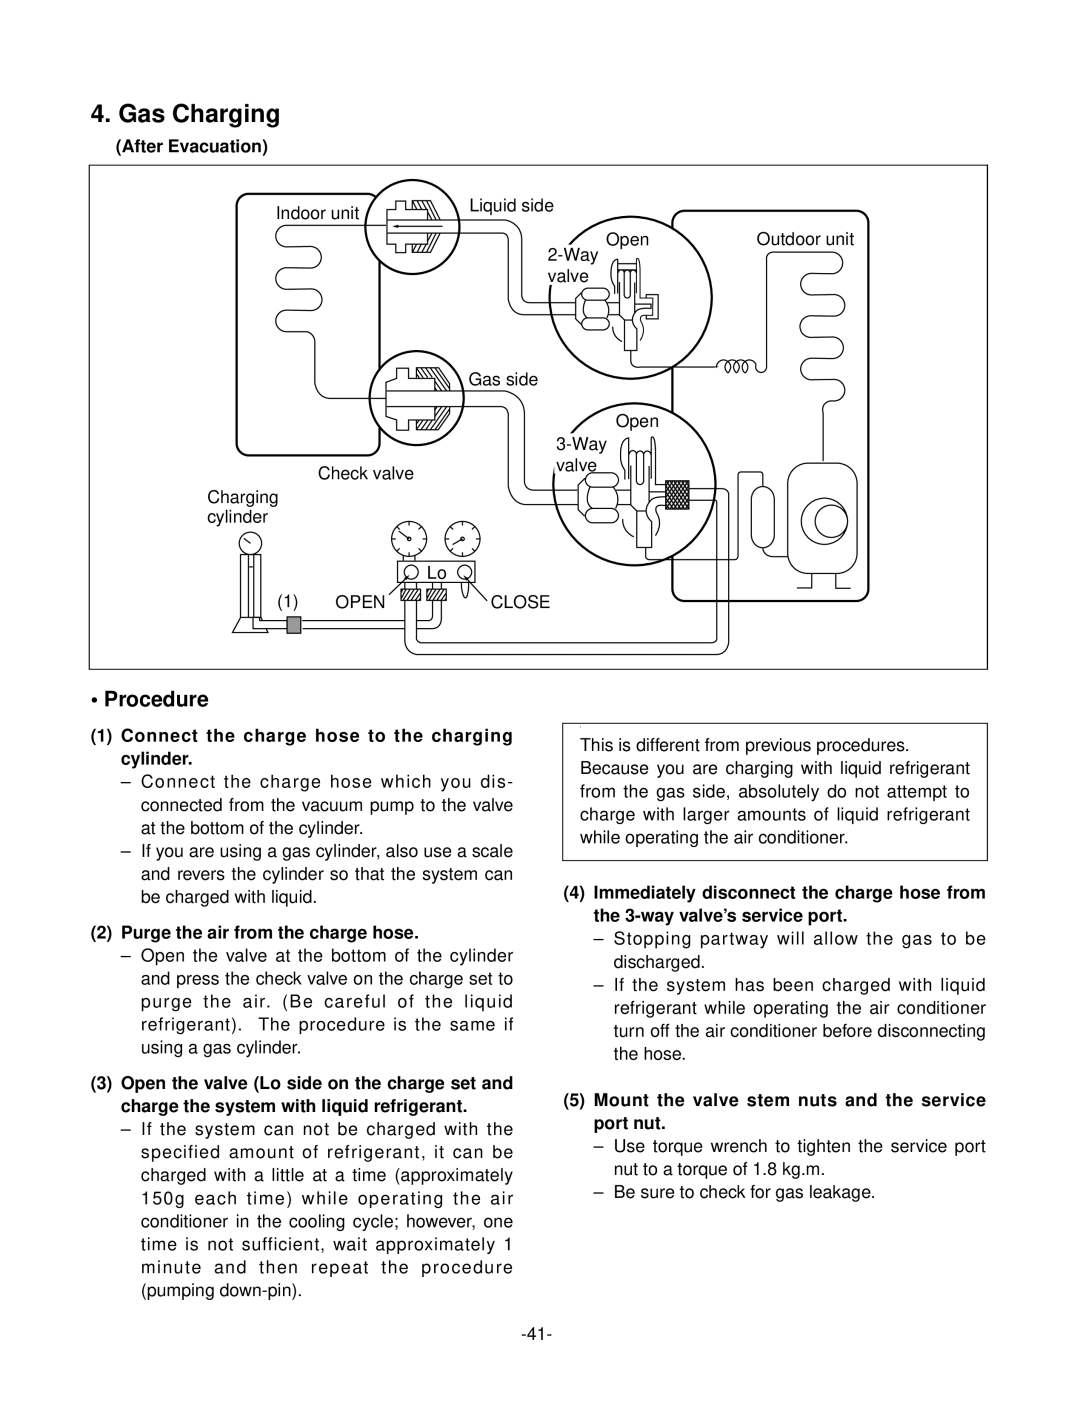 LG Electronics LSC183VMA Gas Charging, Procedure, After Evacuation, Connect the charge hose to the charging cylinder 